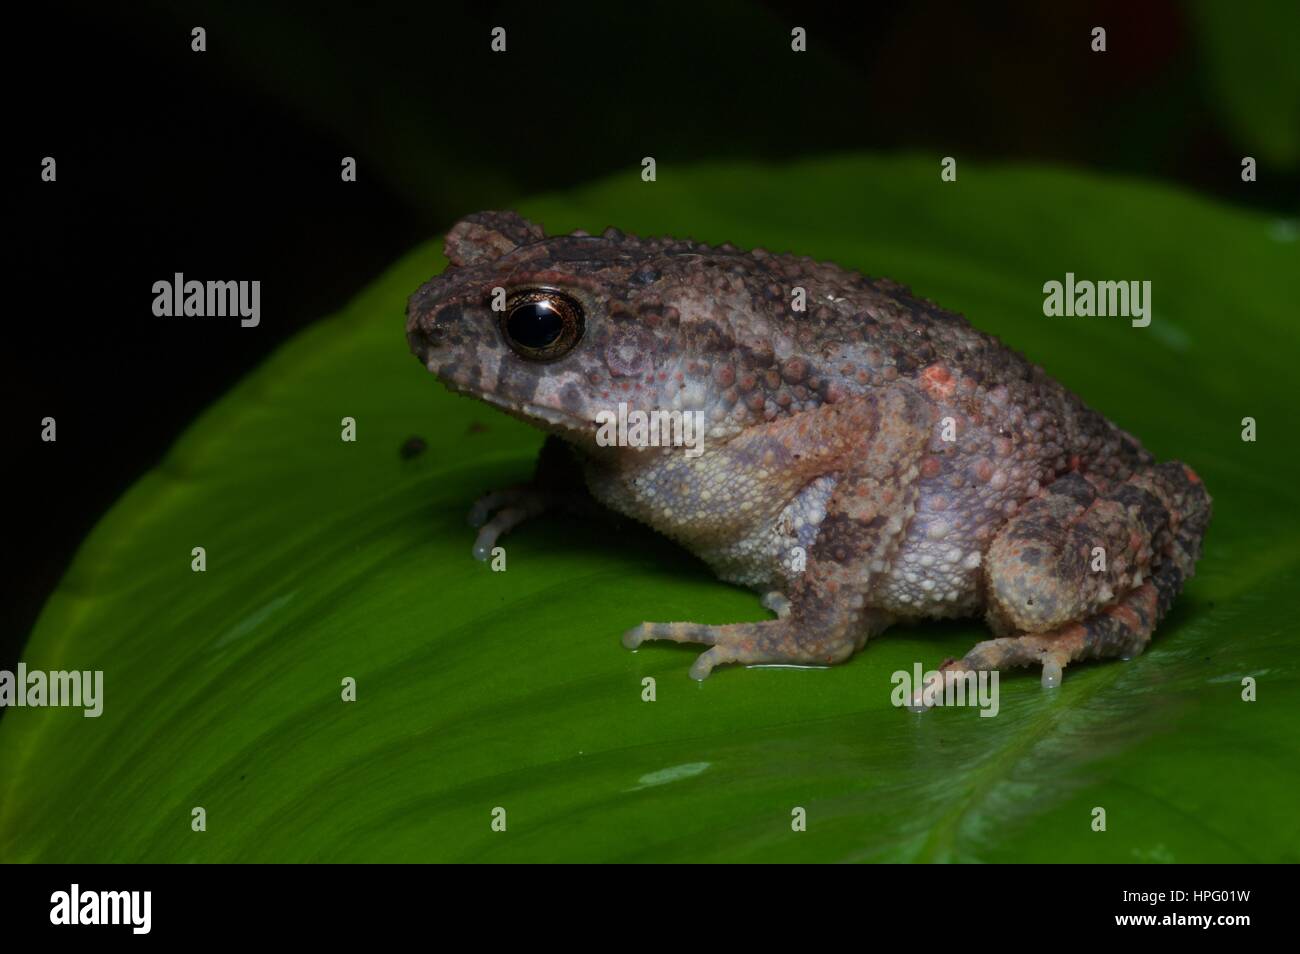 A Lesser Stream Toad (Ingerophrynus parvus) on a leaf in the rainforest in Ulu Yam, Selangor, Malaysia Stock Photo